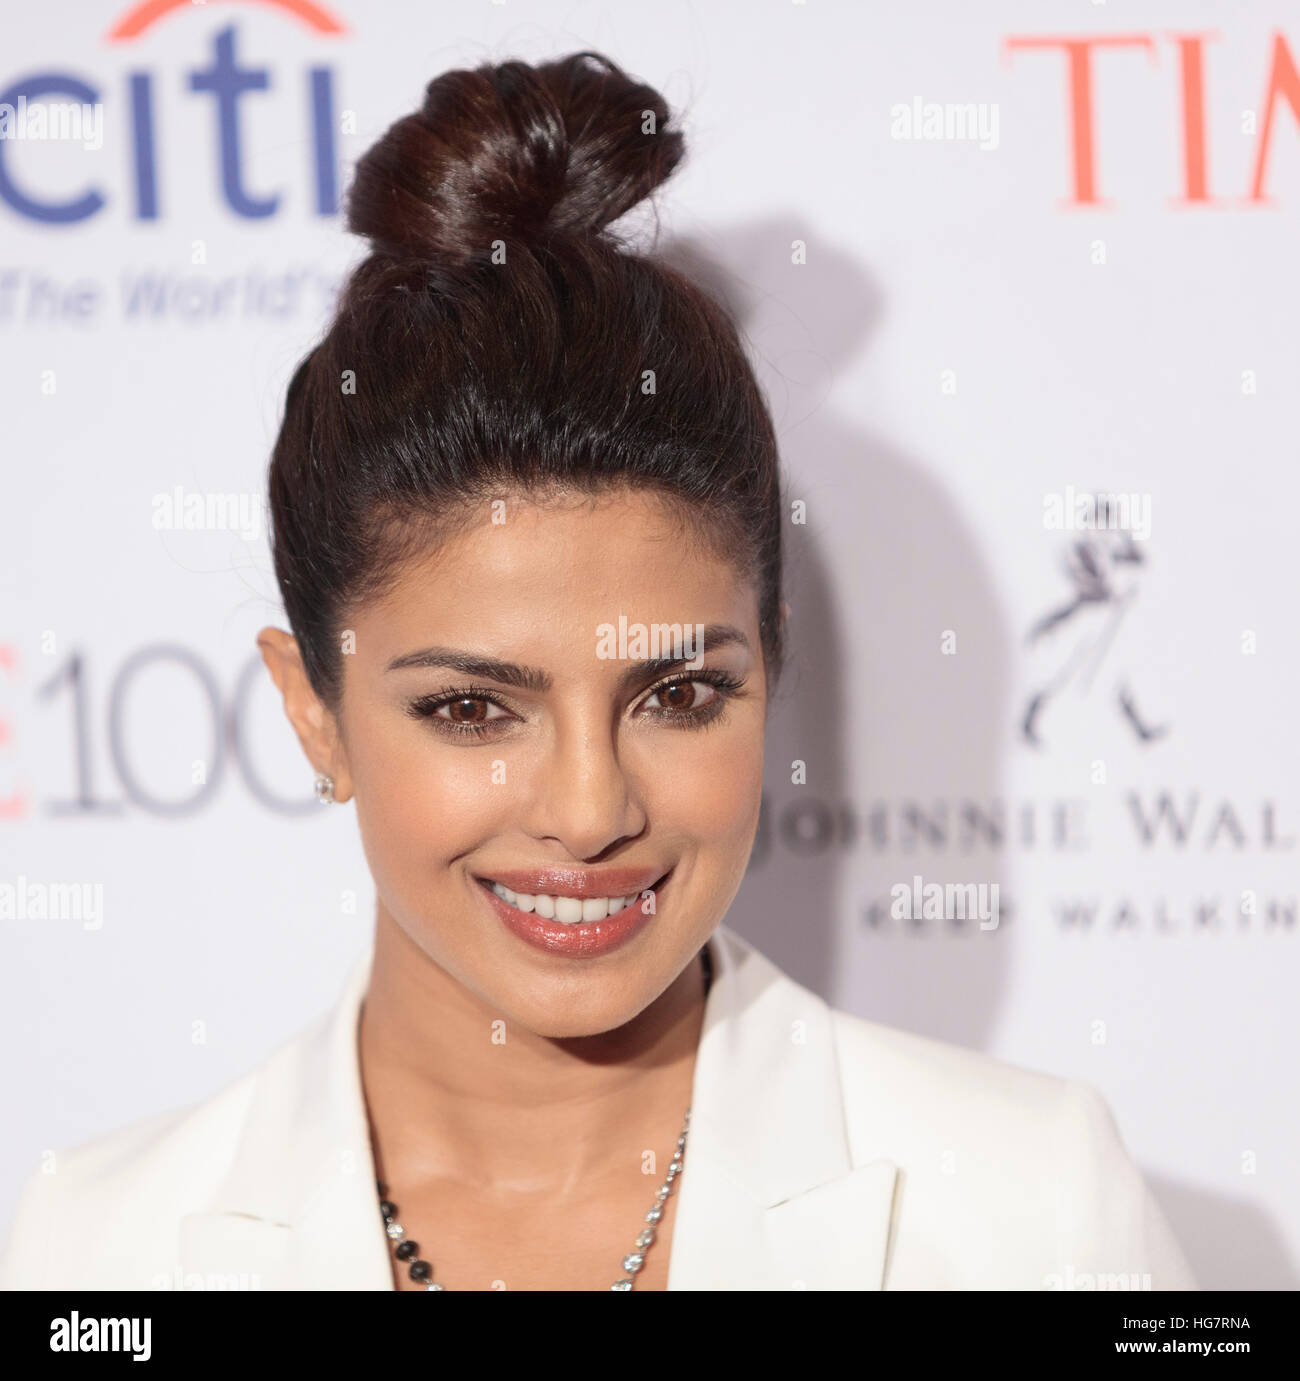 Priyanka Chopra At Arrivals For Time 100 Gala Dinner 2016, Jazz At Lincoln  Center'S Frederick Rose Hall, New York, Ny April 26, Photo By